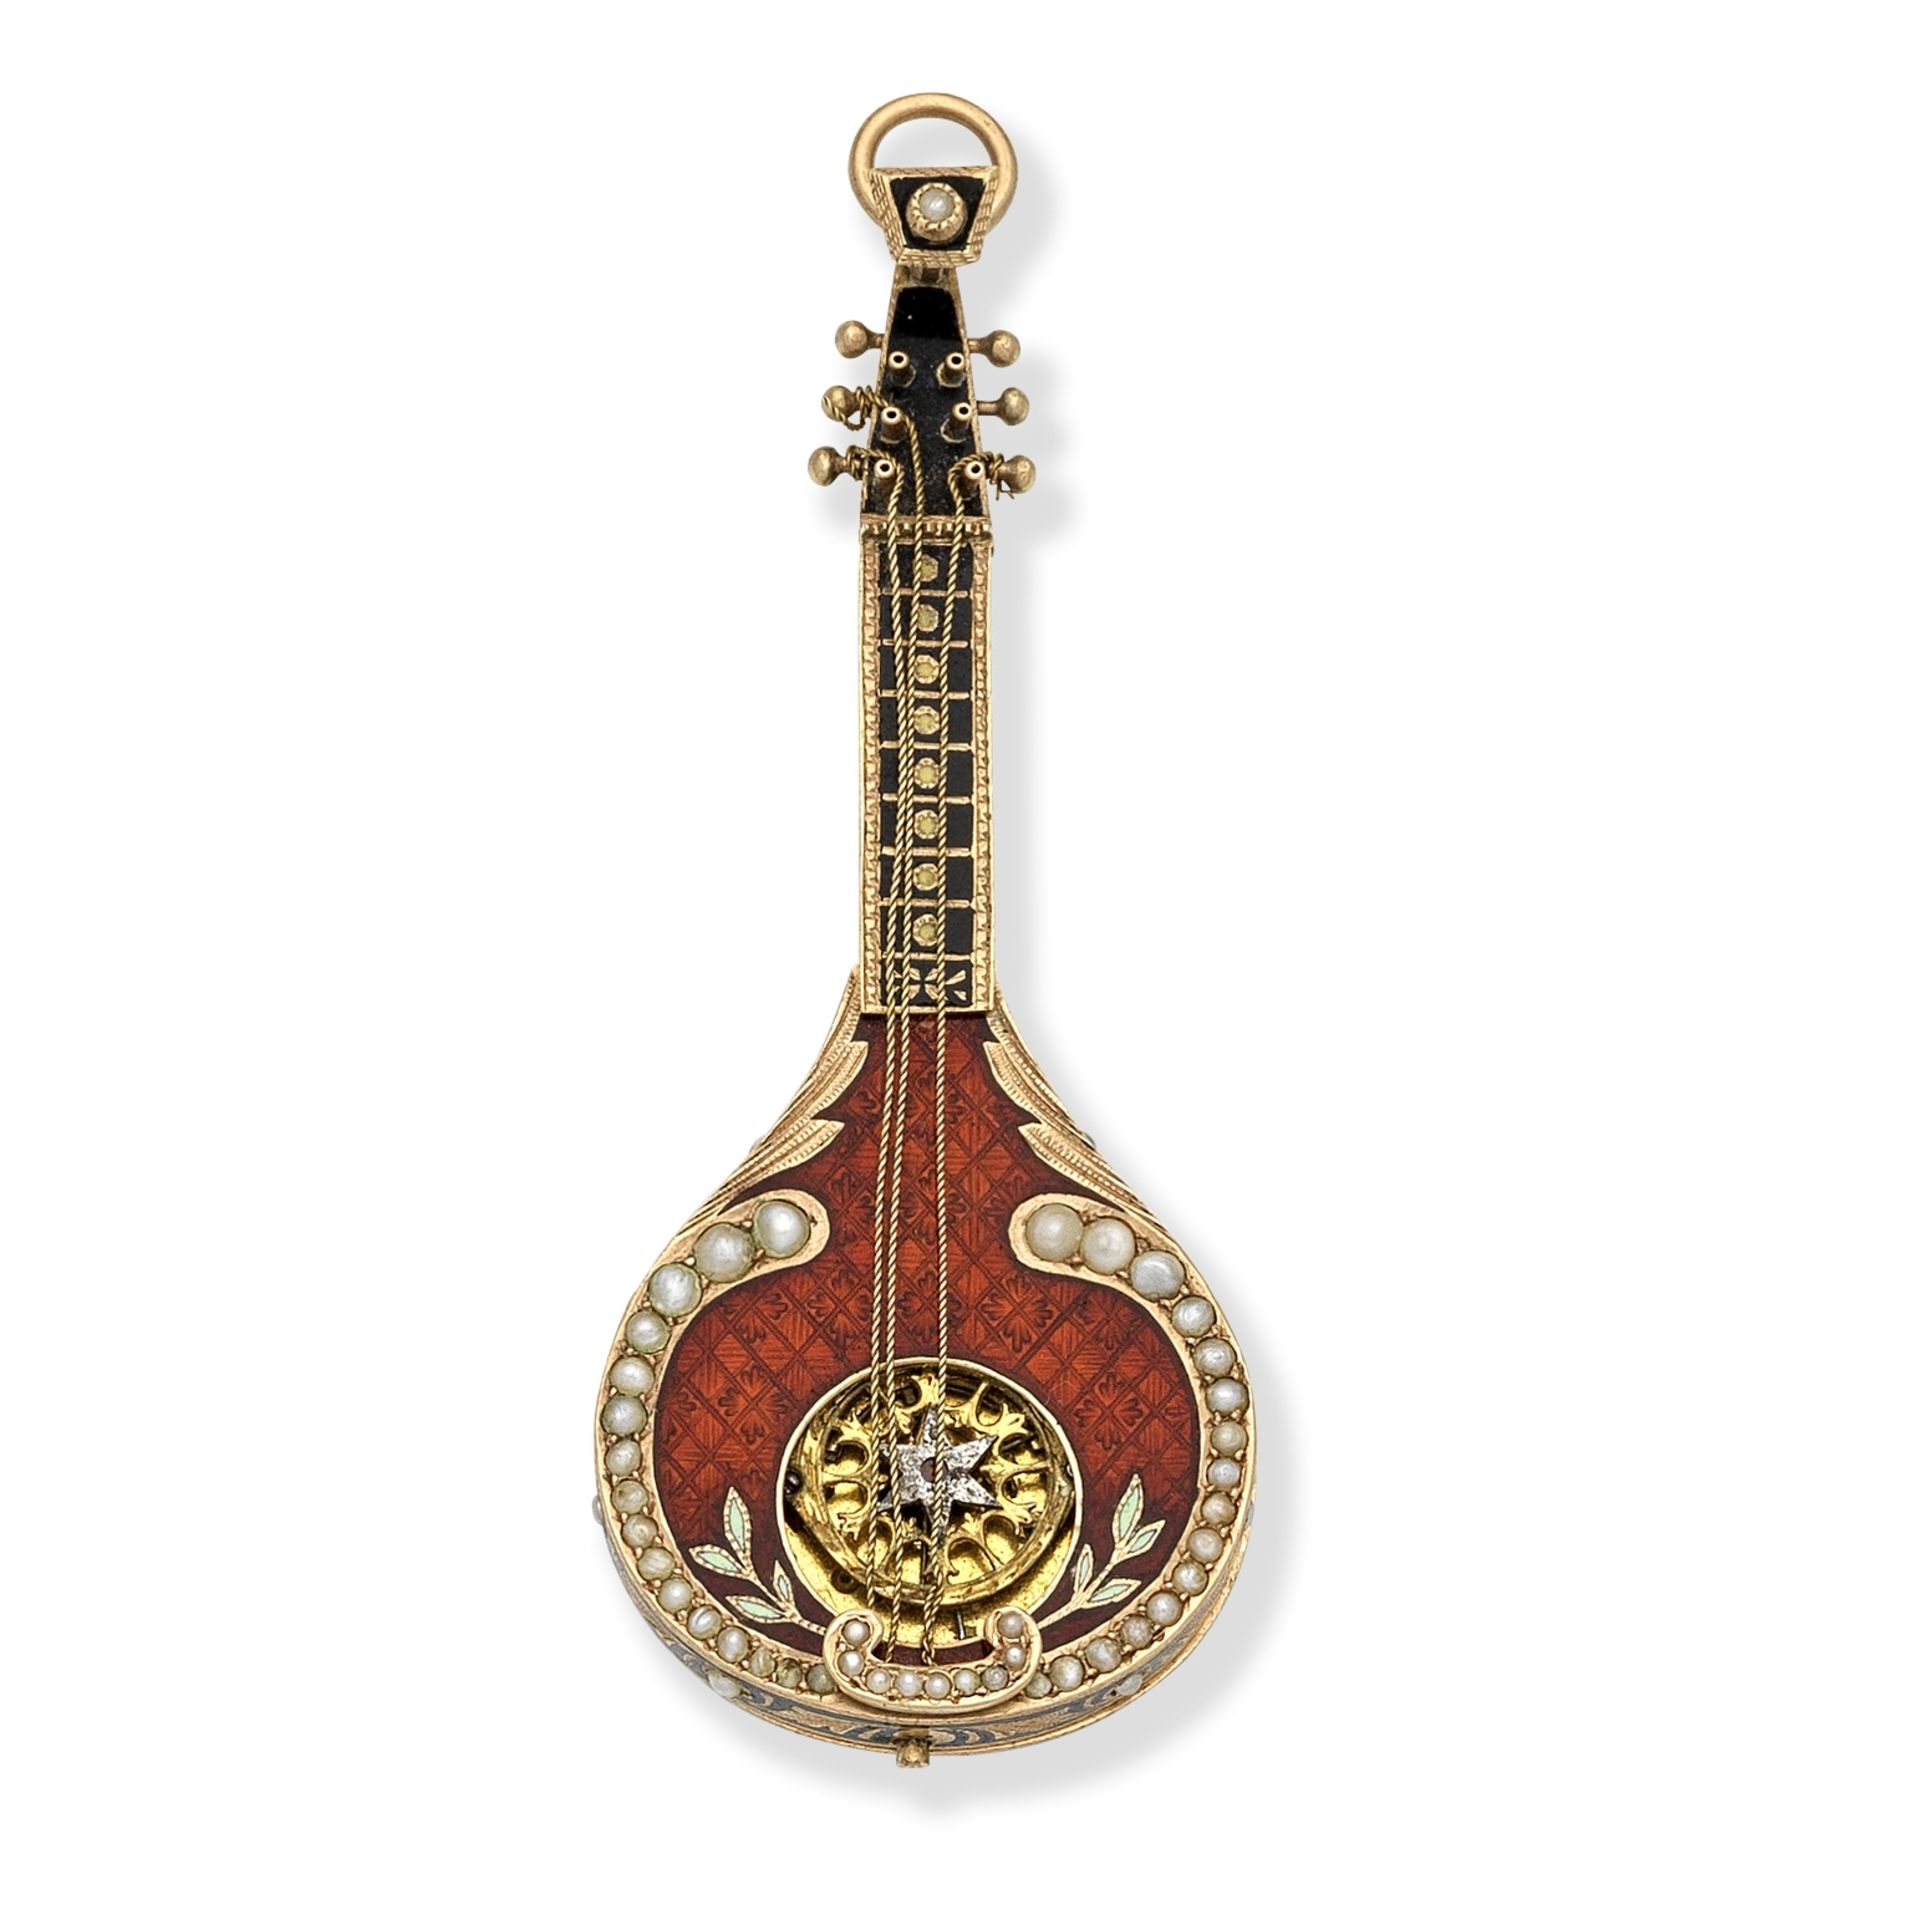 A rare gold, polychrome enamel and pearl time piece in the form of a mandolin with concealed watc...